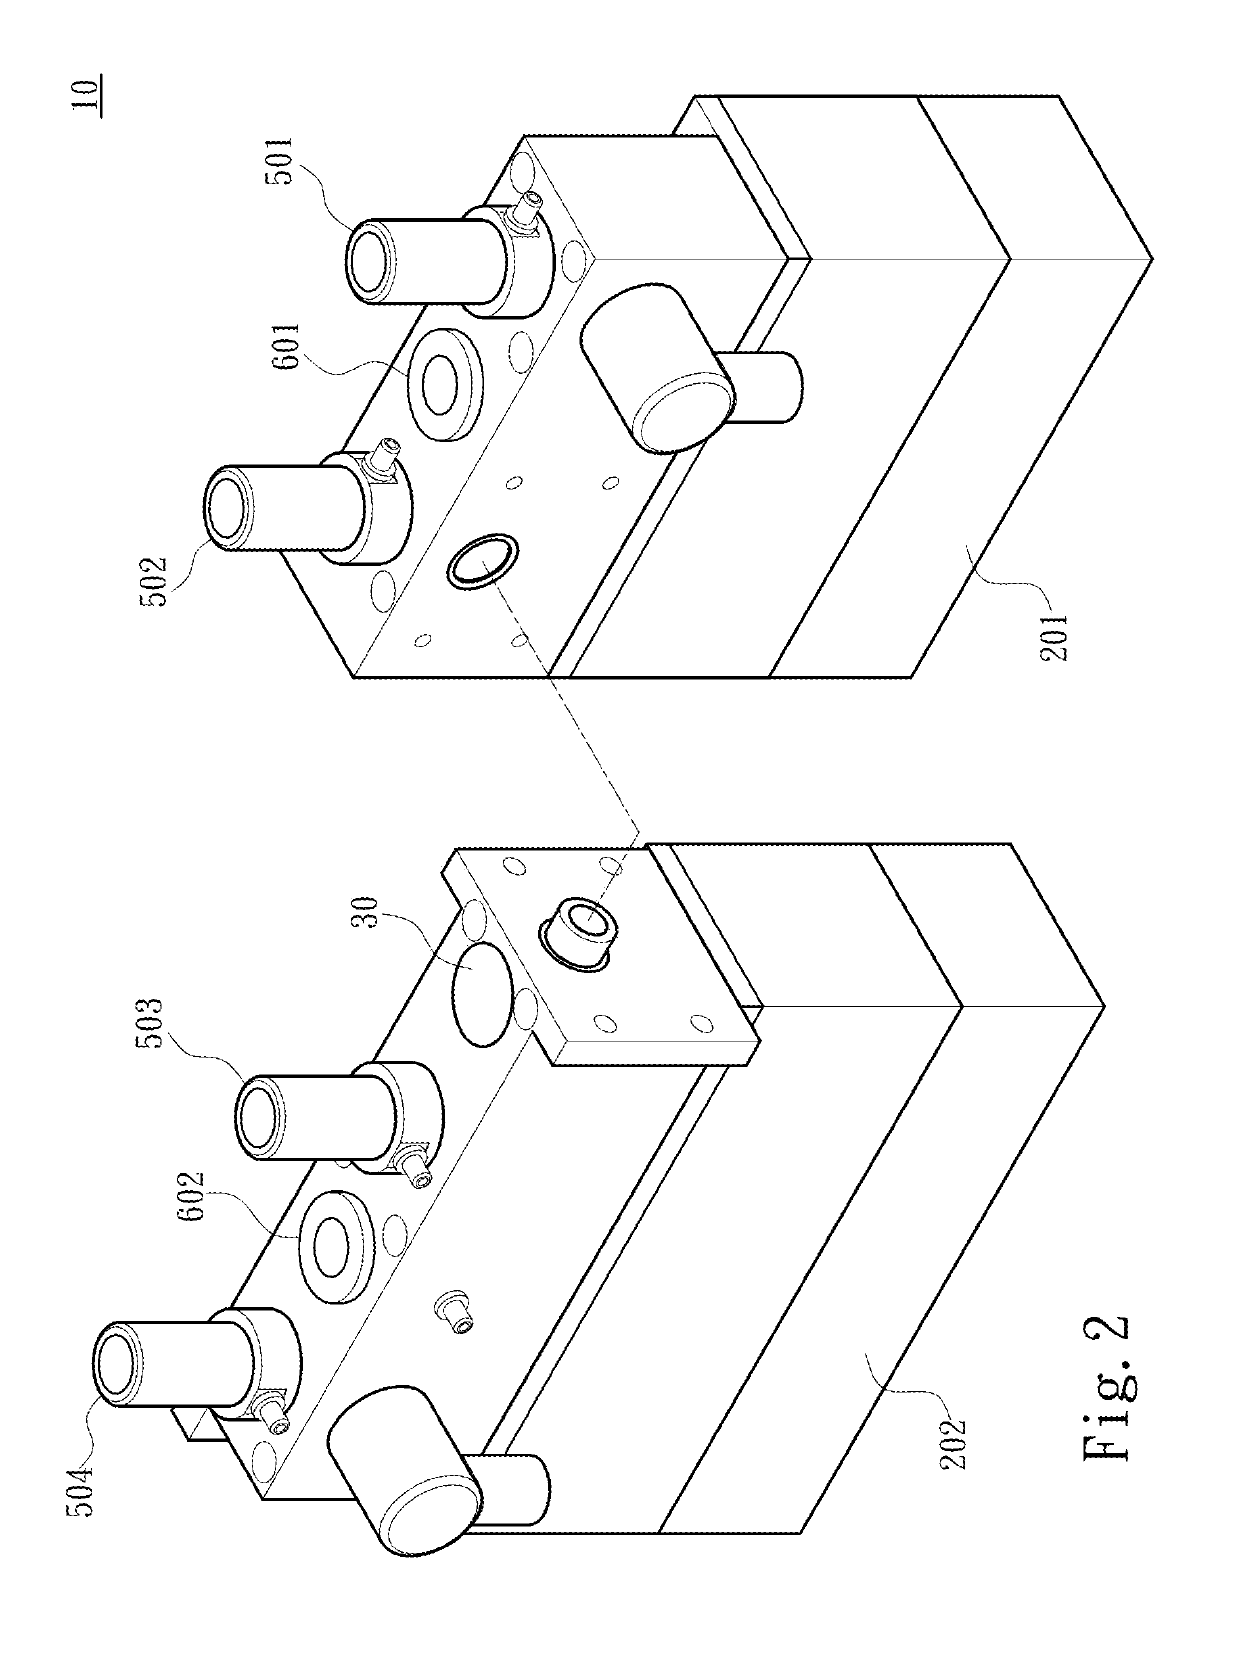 Inflation valve seat with adjustable flow